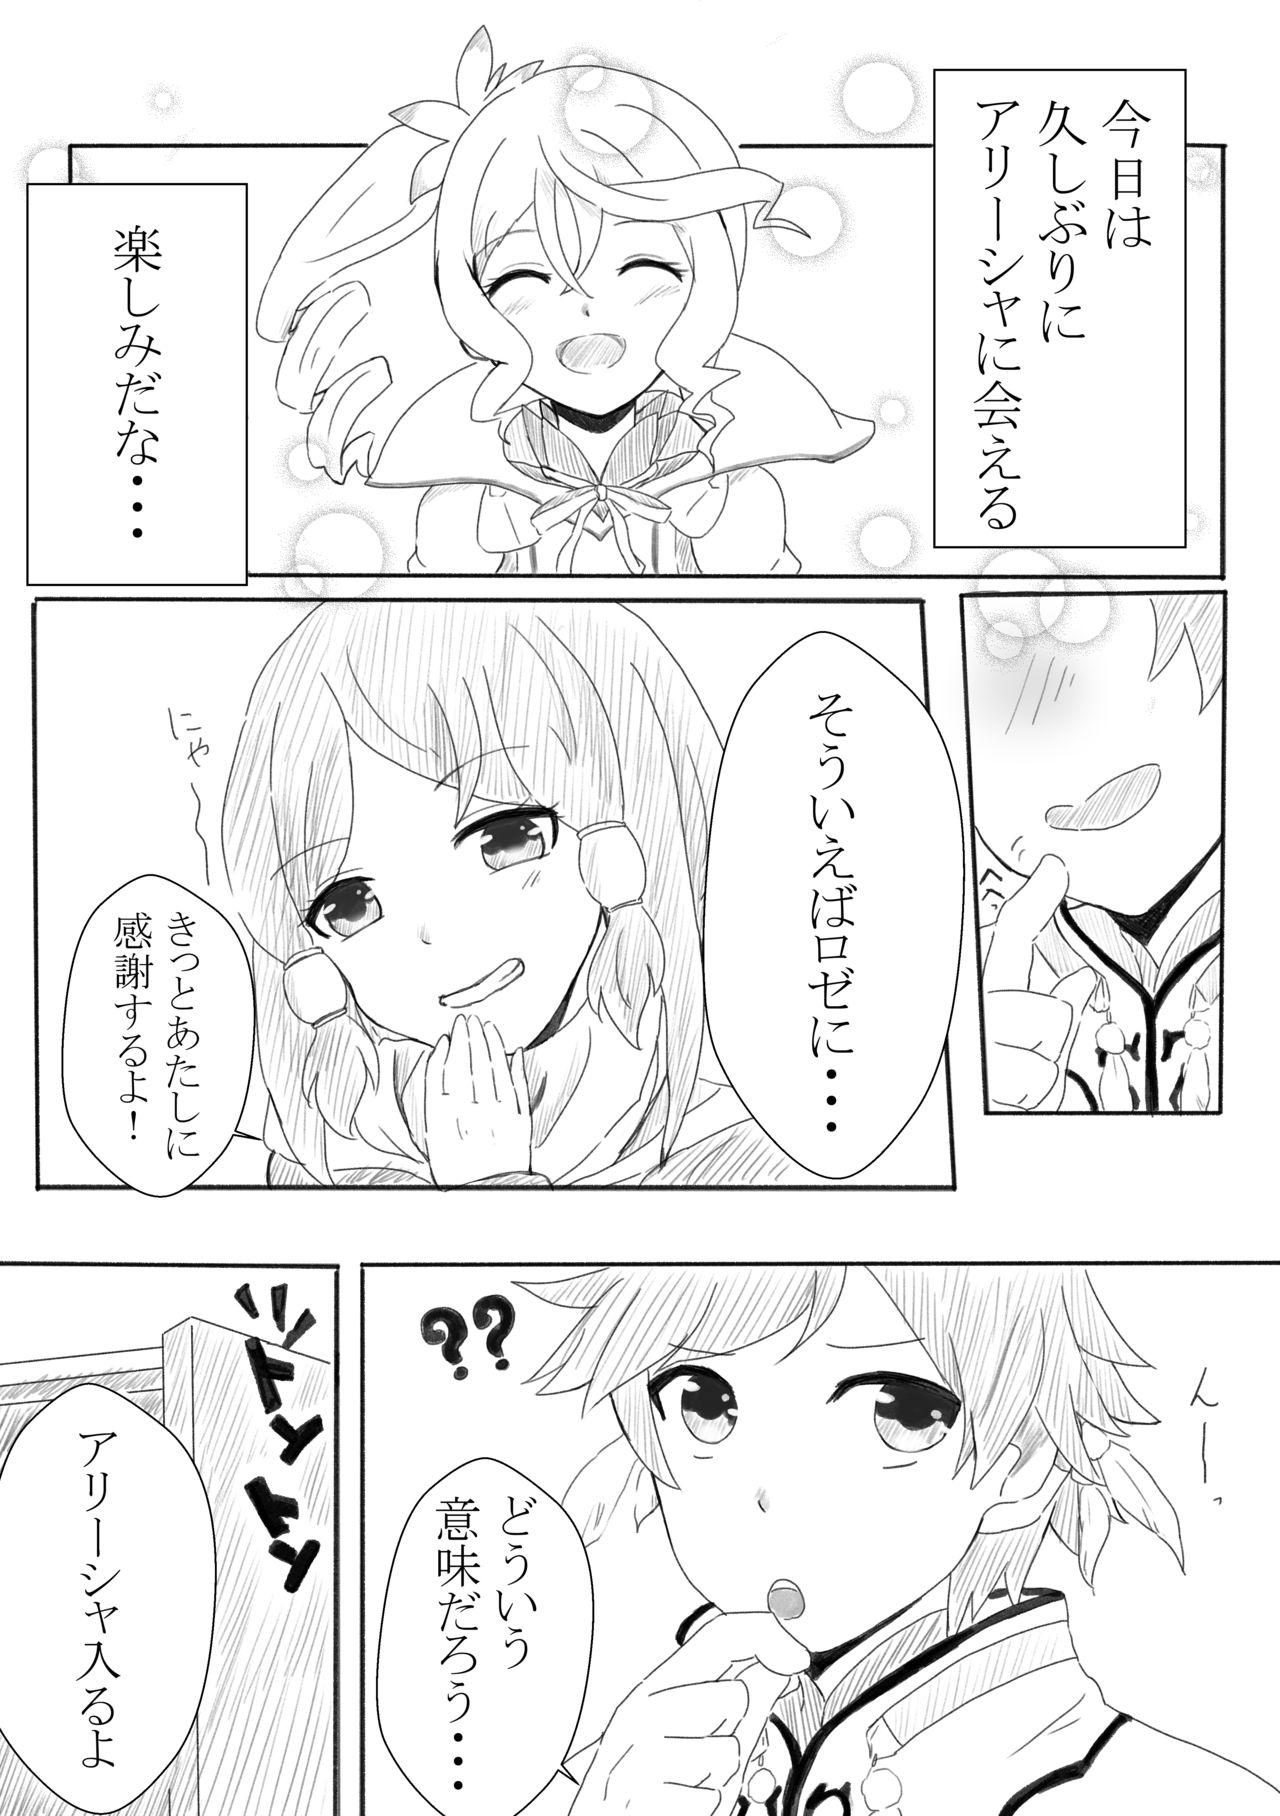 Joven アリーシャで癒して？ - Tales of zestiria Dominant - Page 2